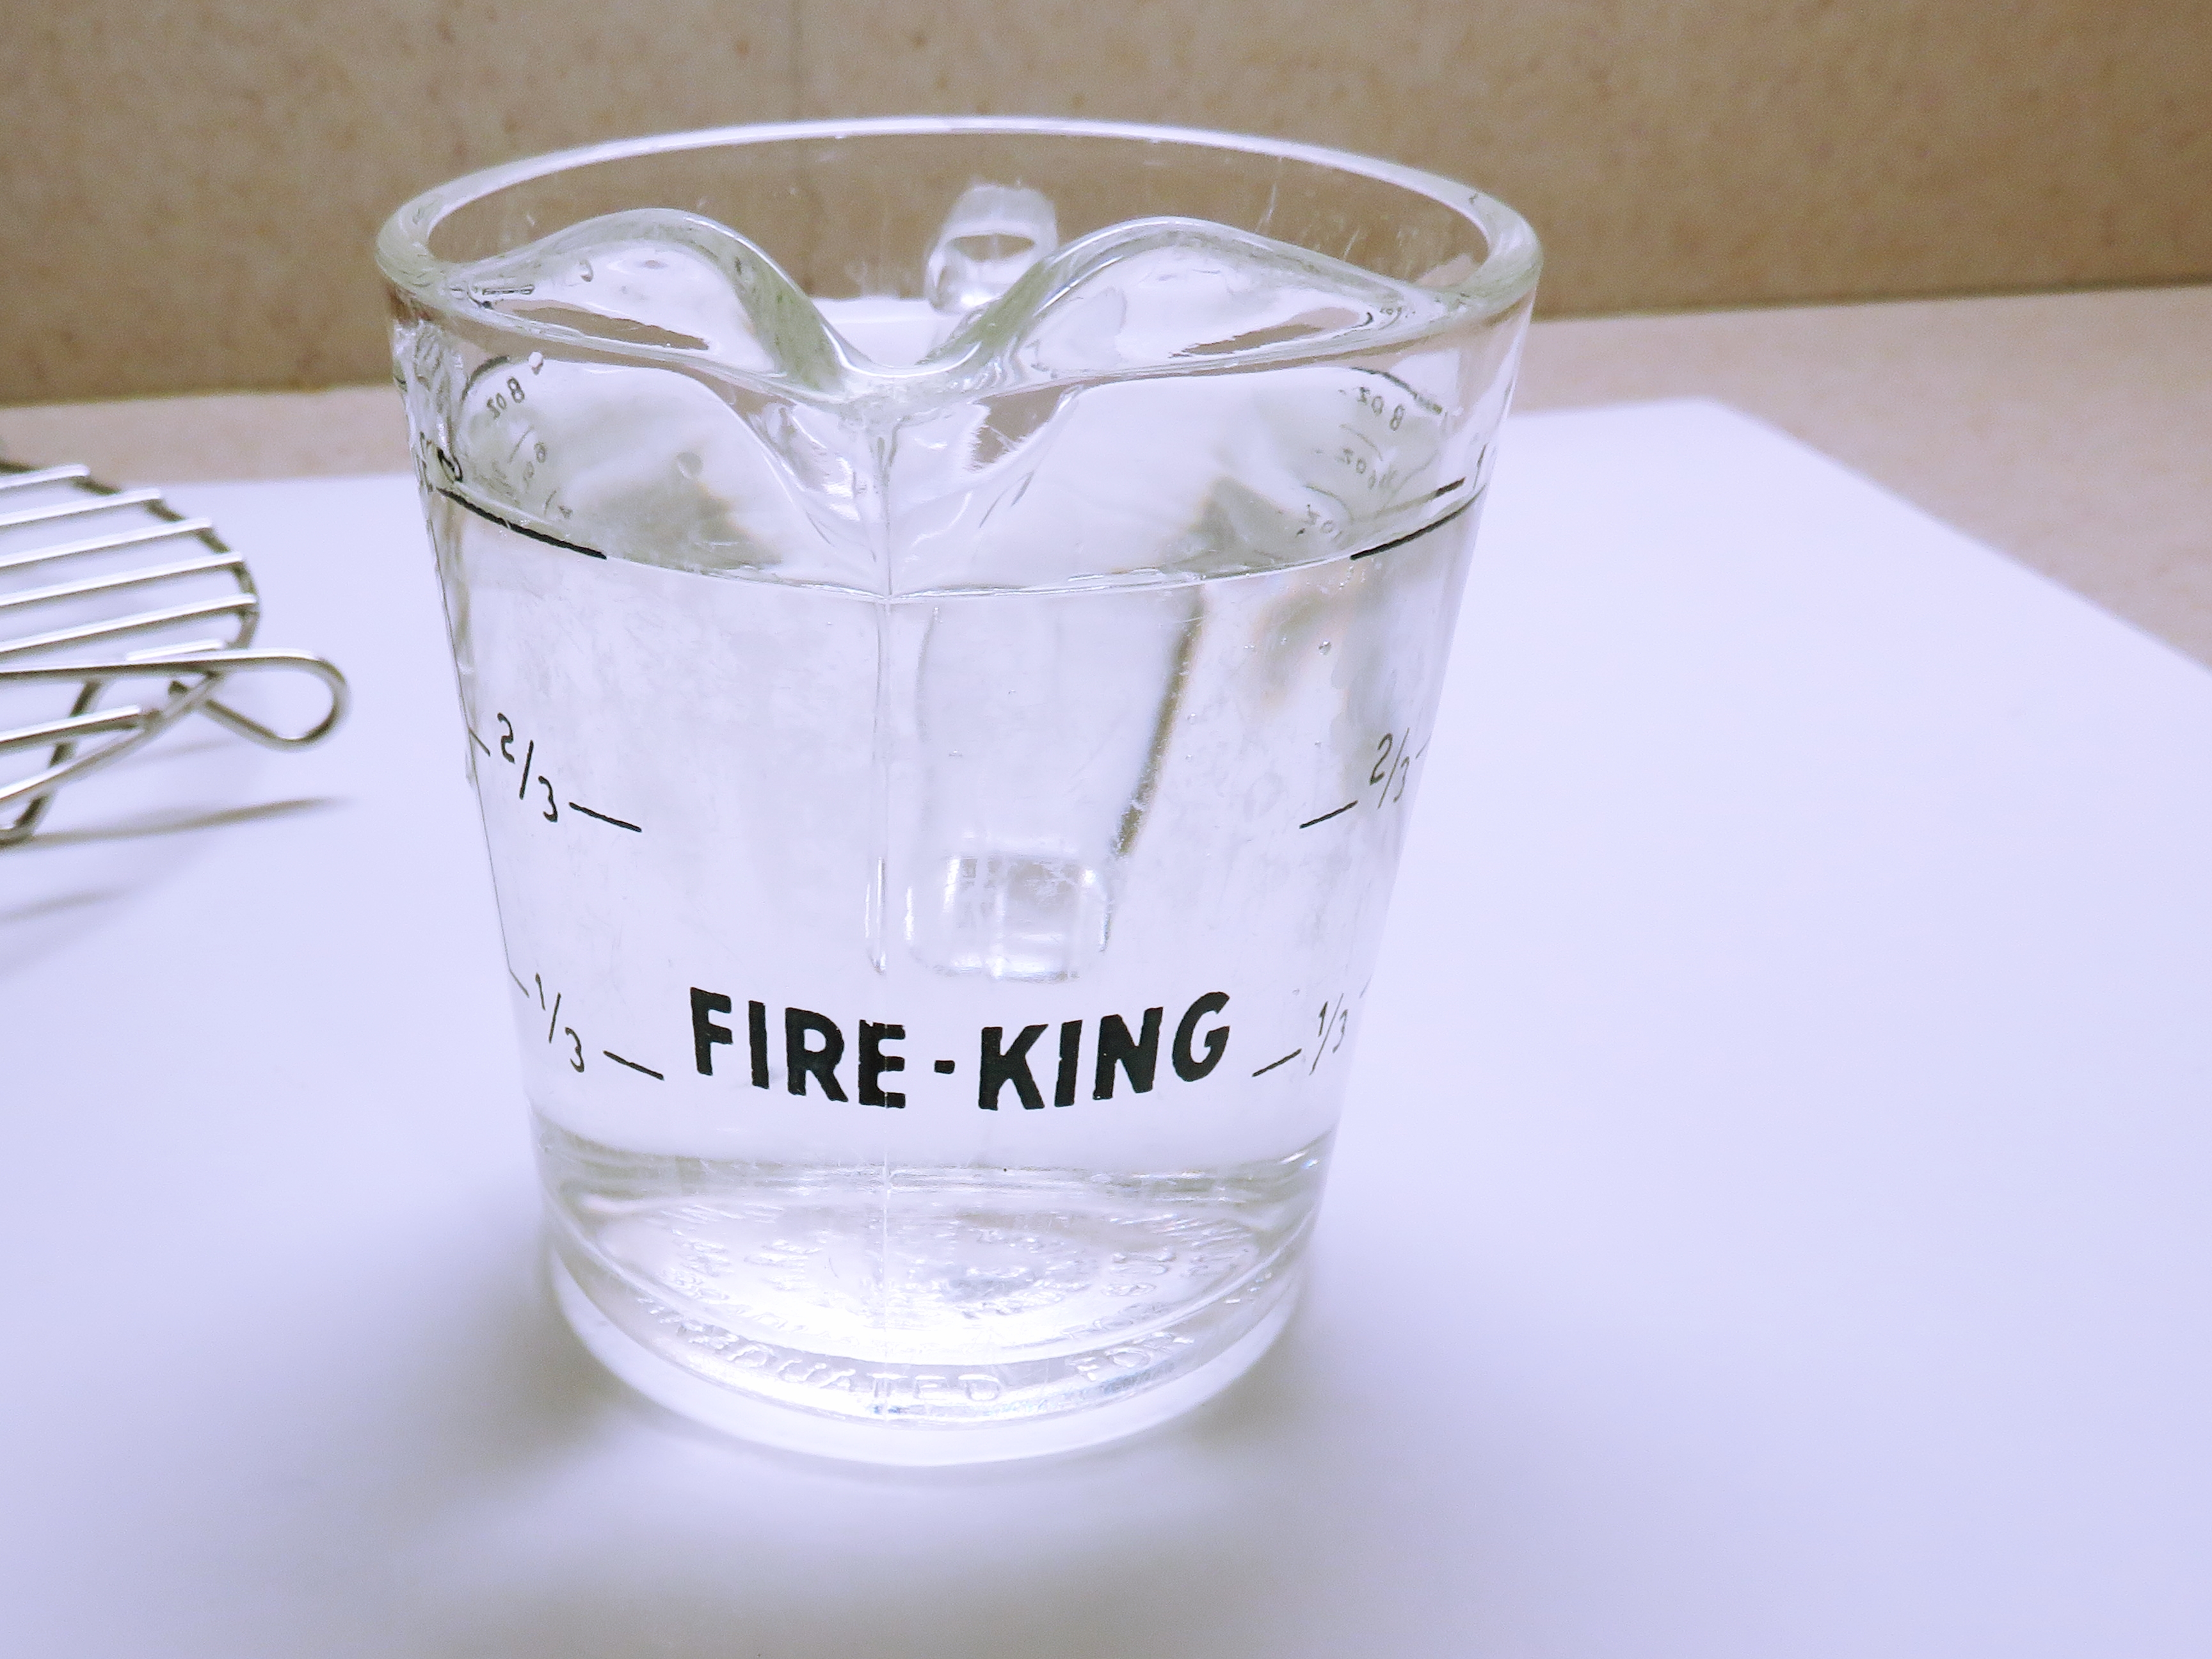 cup of water fire-king glass